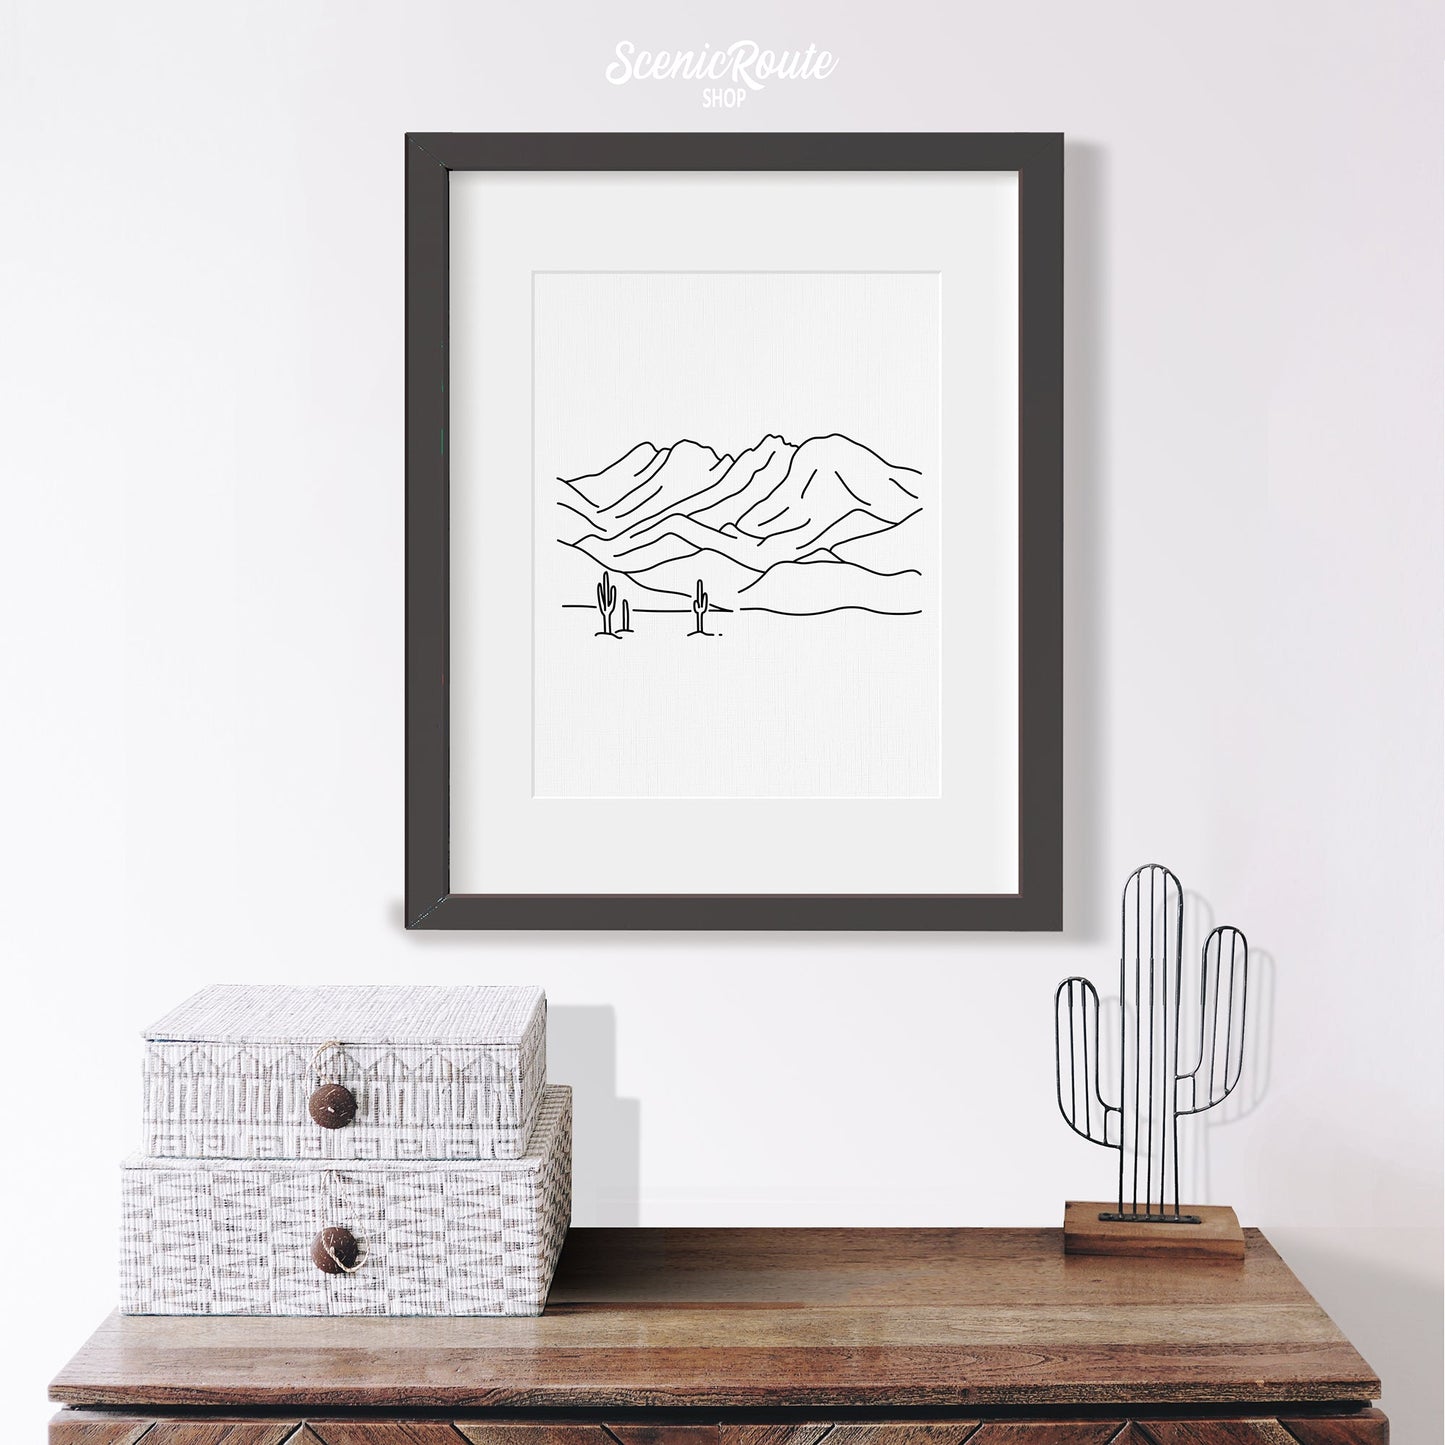 A framed line art drawing of Four Peaks Mountains above a table with saguaro figurine